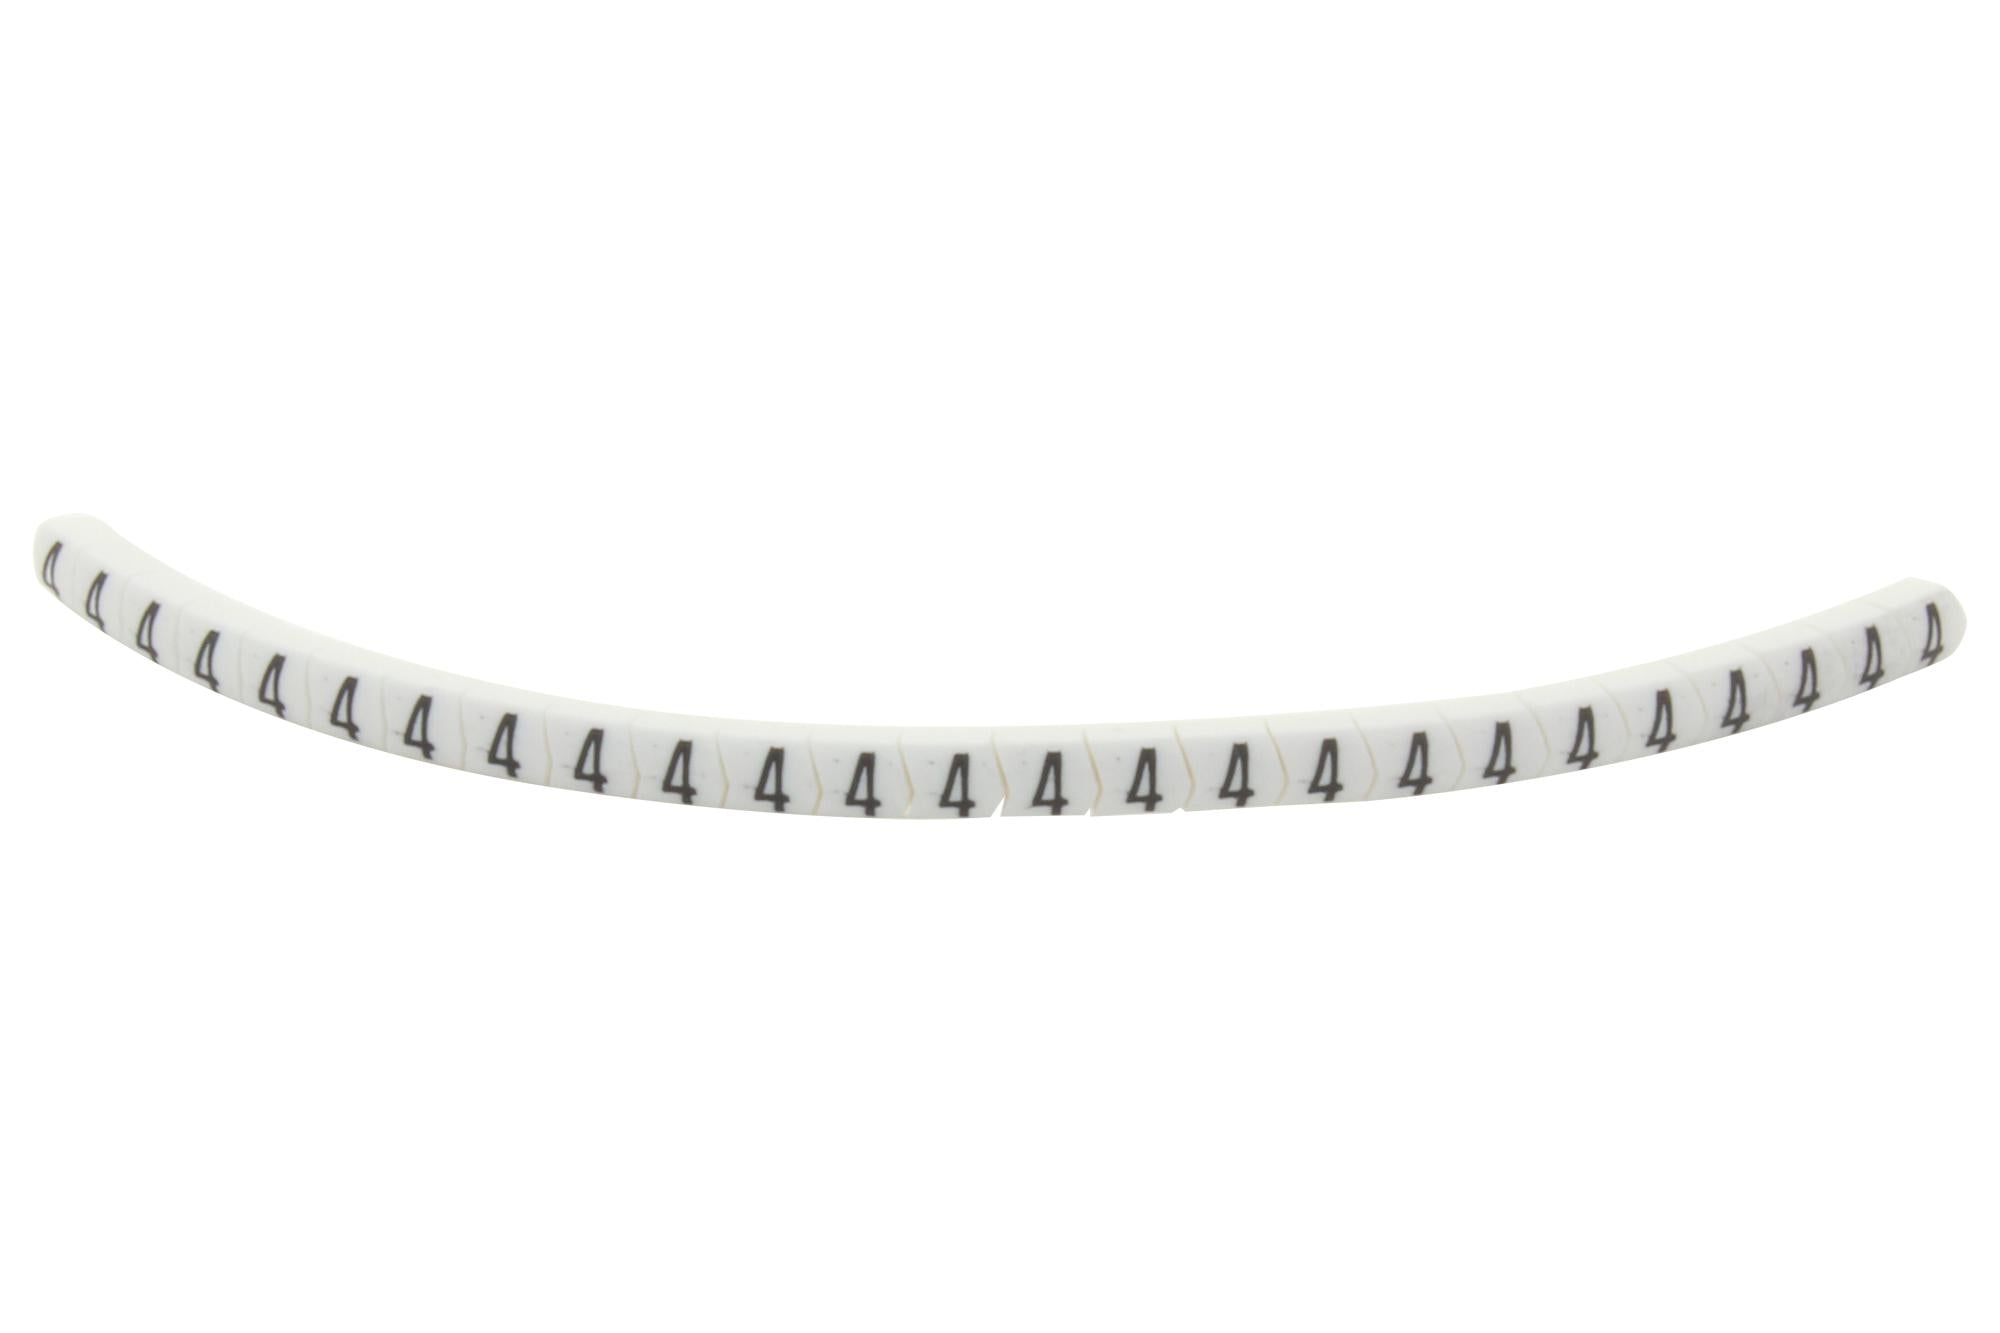 901-11019 CABLE MARKER, PRE PRINTED, PVC, WHITE HELLERMANNTYTON